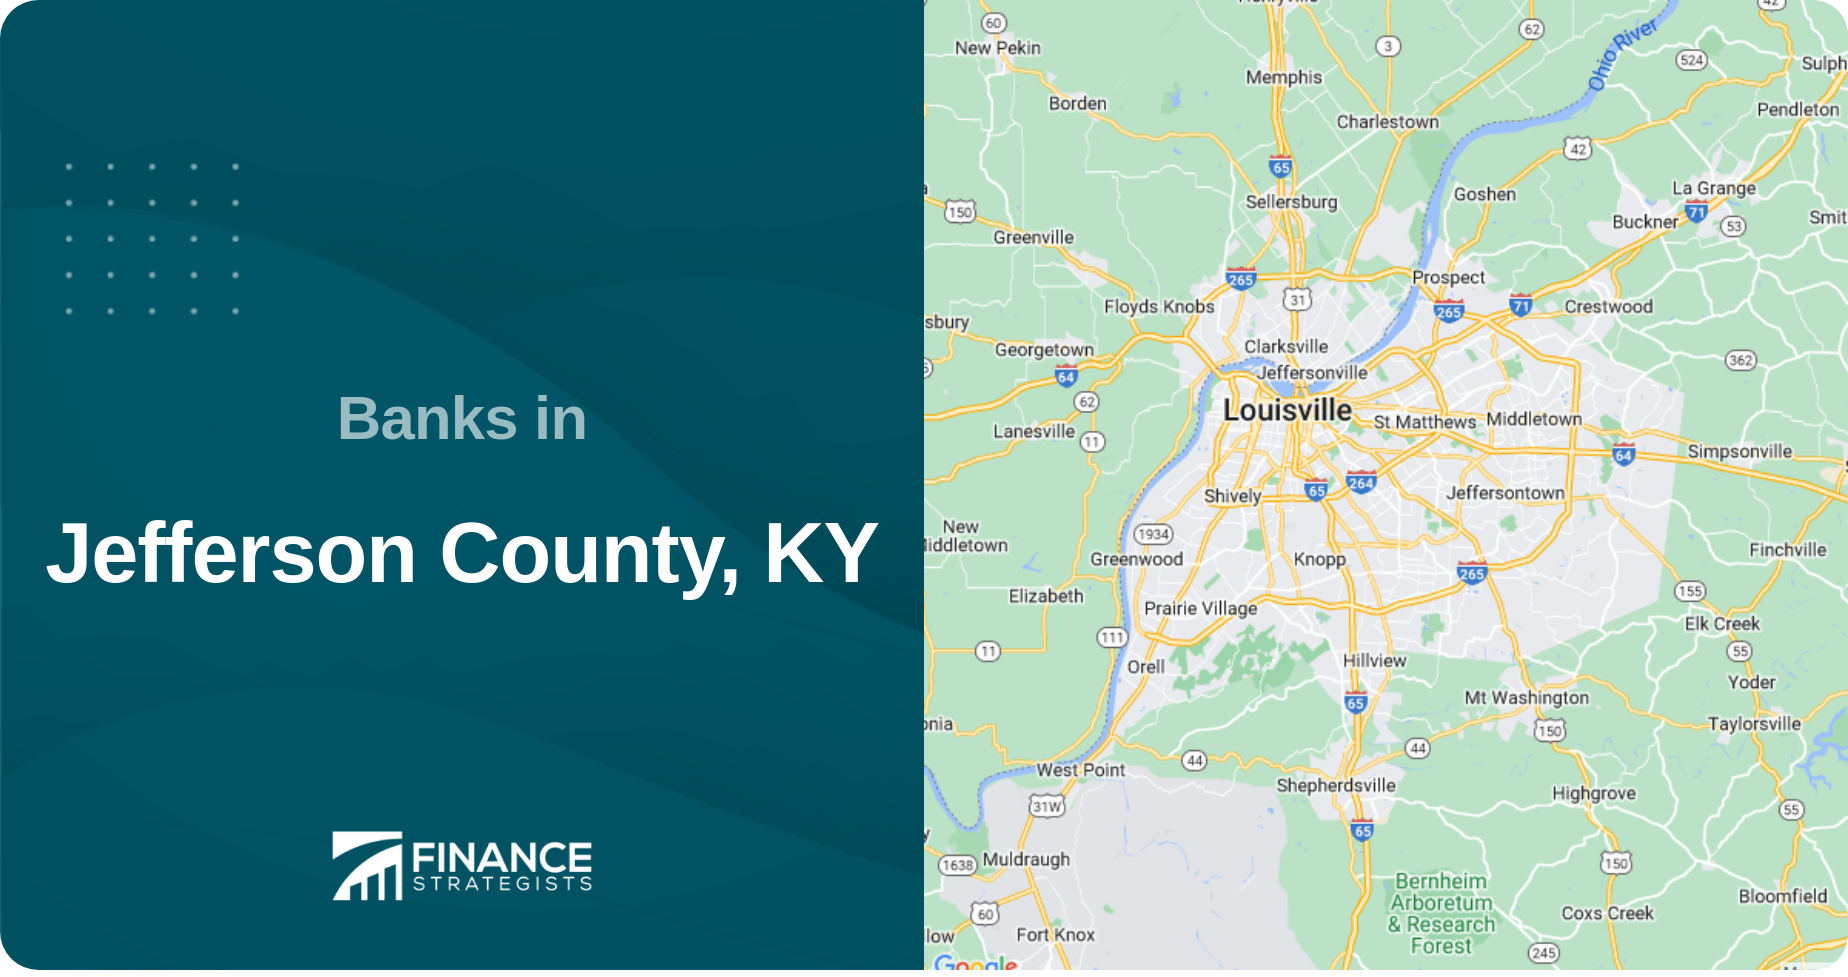 Banks in Jefferson County, KY